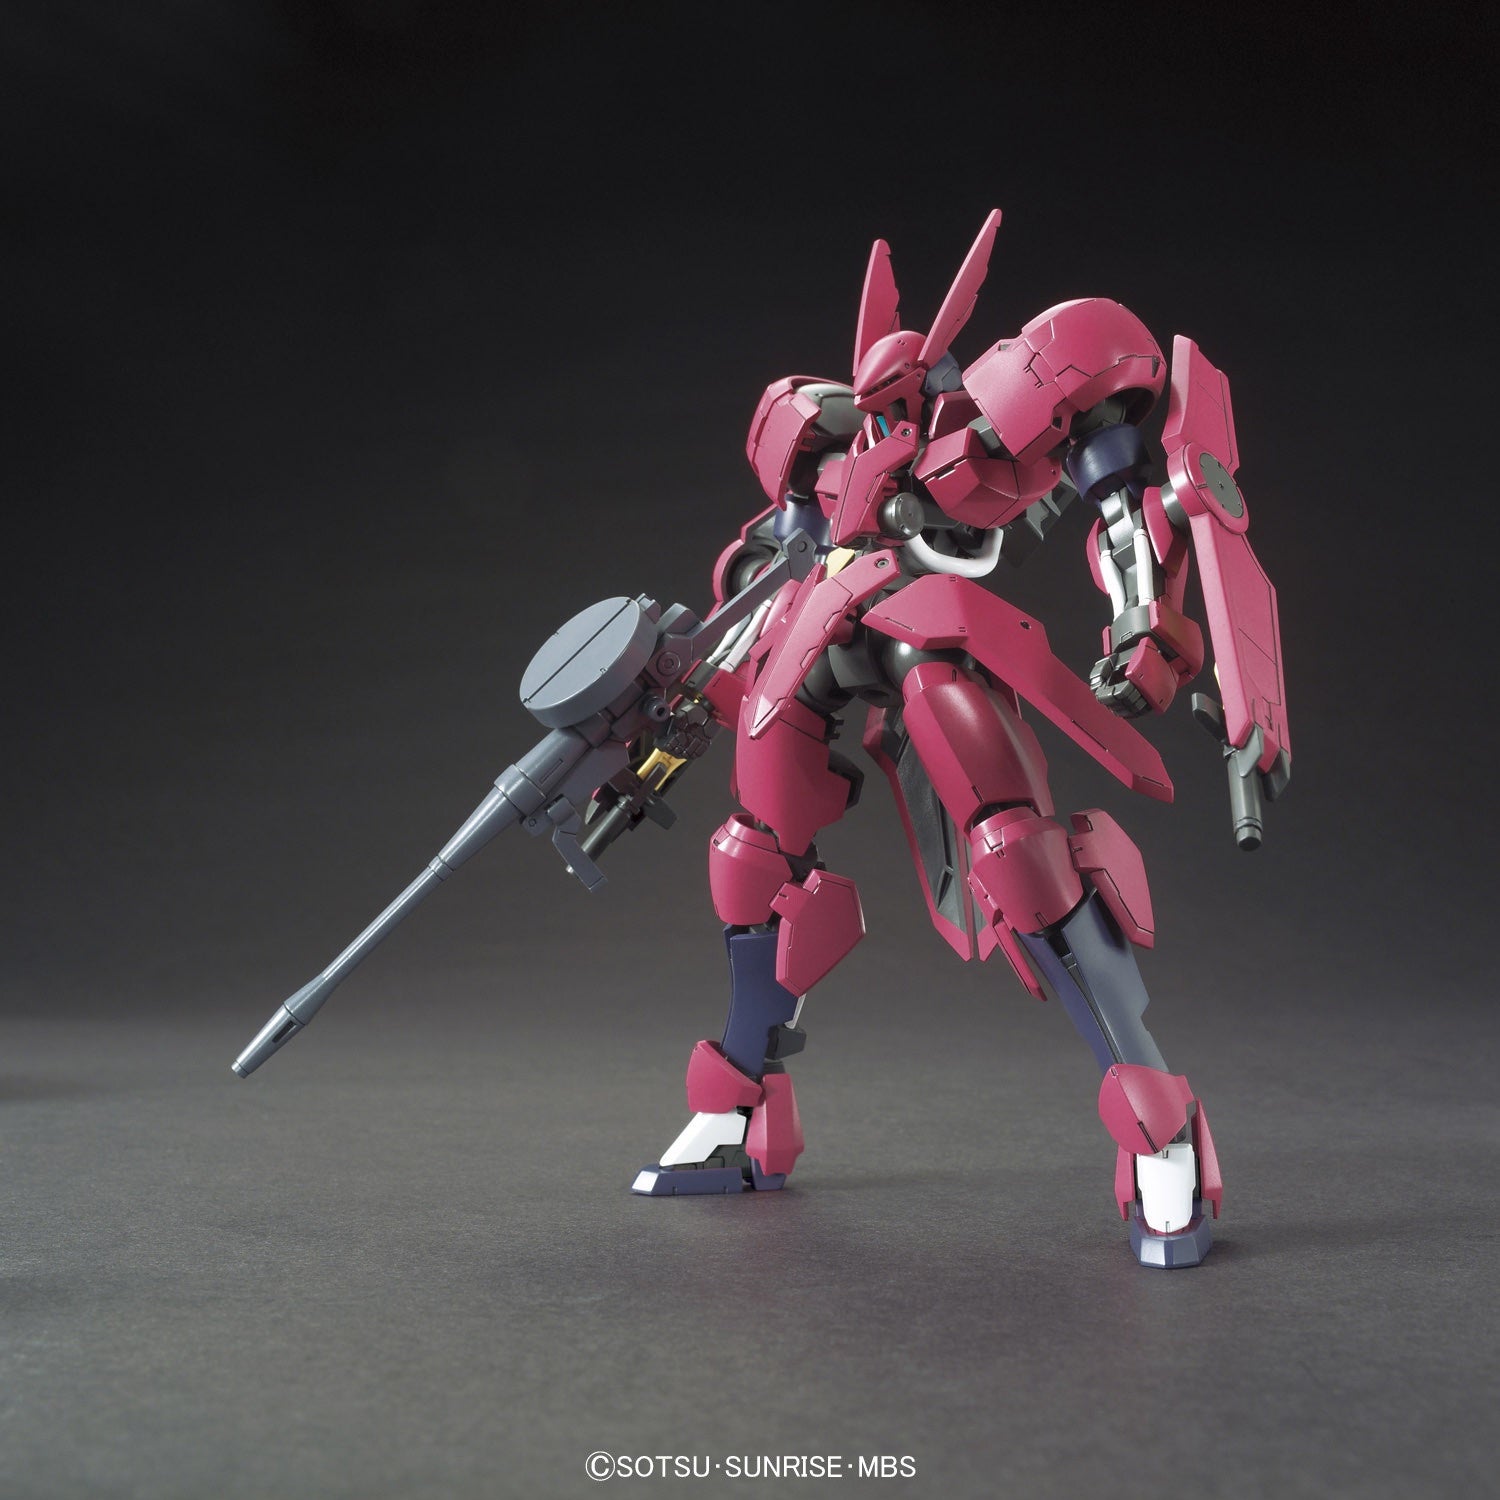 HG 1/144 Iron-Blooded Orphans #14 Grimgerde #5057981 by Bandai